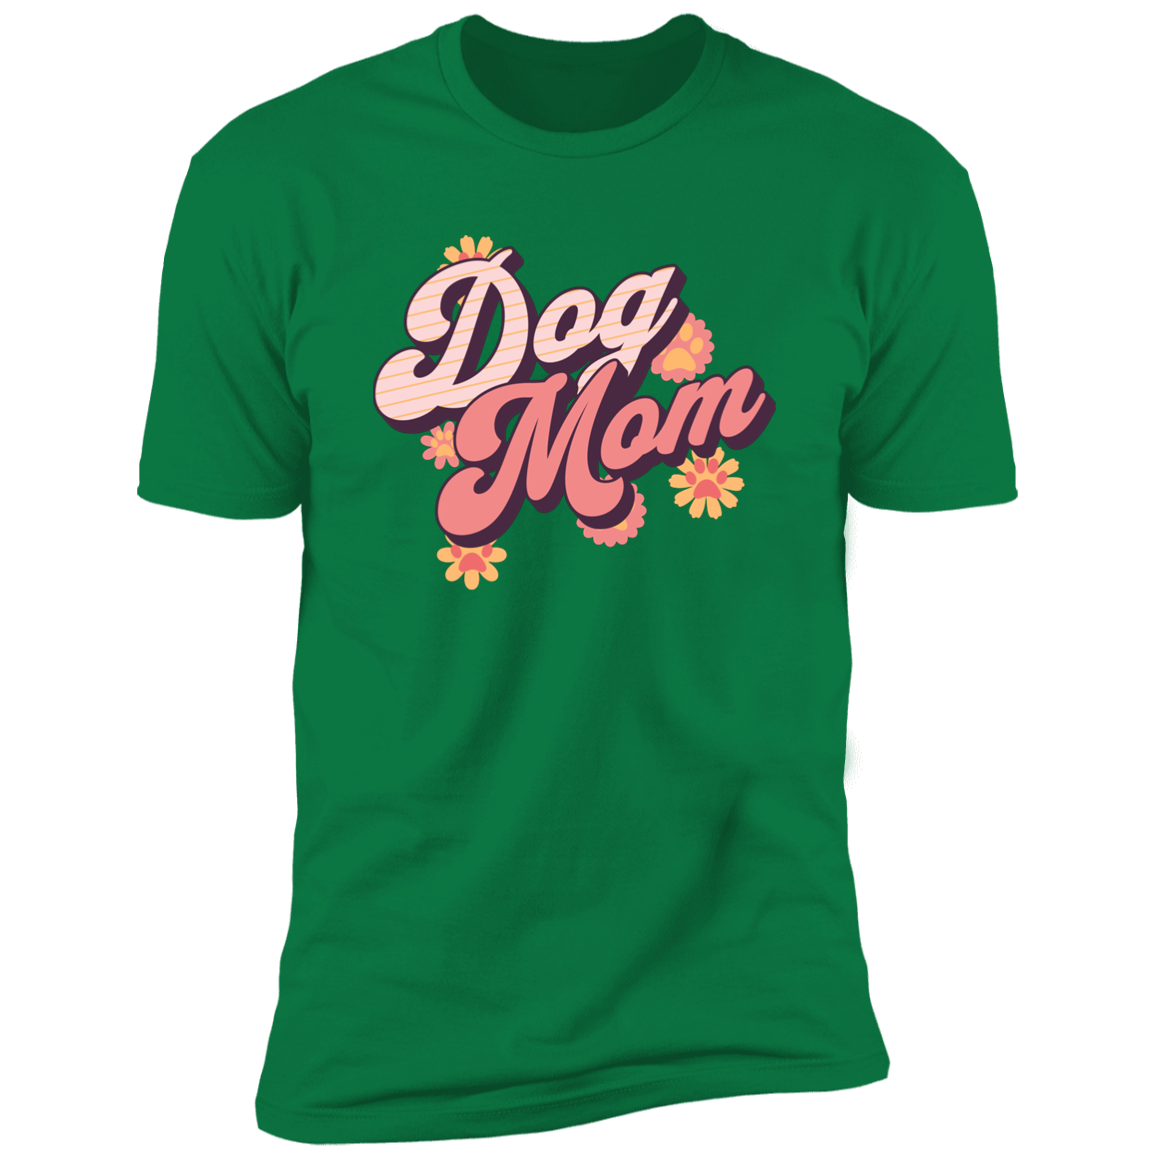 Retro Dog Mom t-shirt, Dog Mom shirt, Dog T-shirt for humans, in kelly green